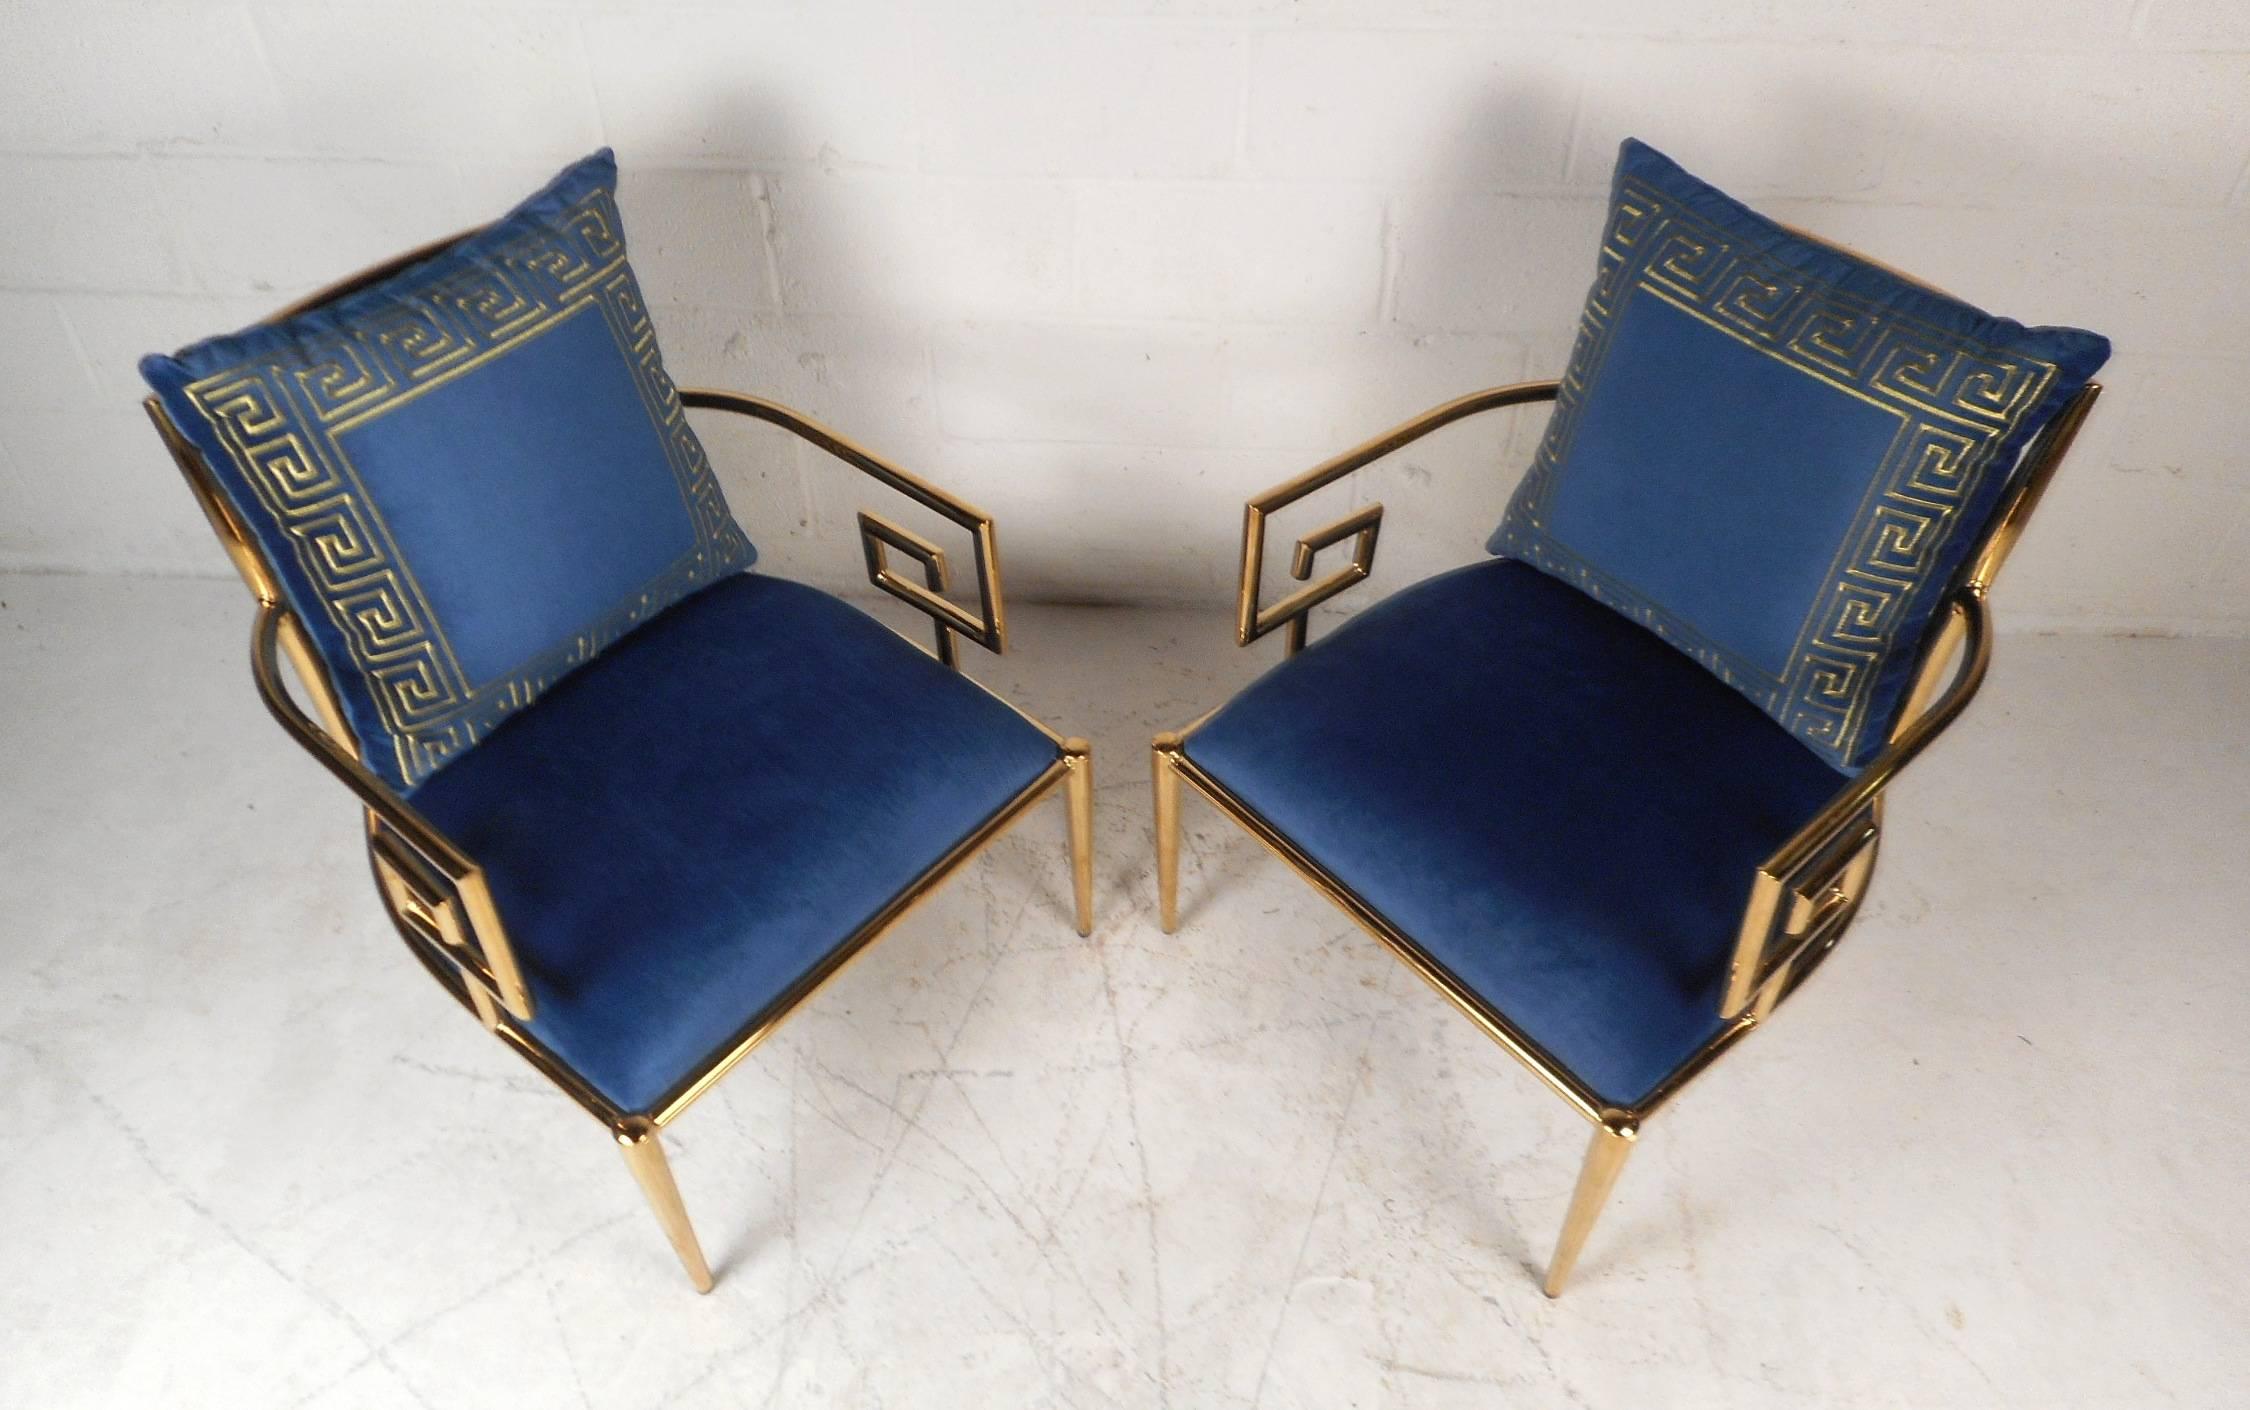 This gorgeous pair of vintage modern armchairs feature a tubular brass frame with unique arm rests. This gorgeous pair offers plenty of comfort with its thick padded seating and backrest. Lovely plush royal blue upholstery, tapered legs, and a